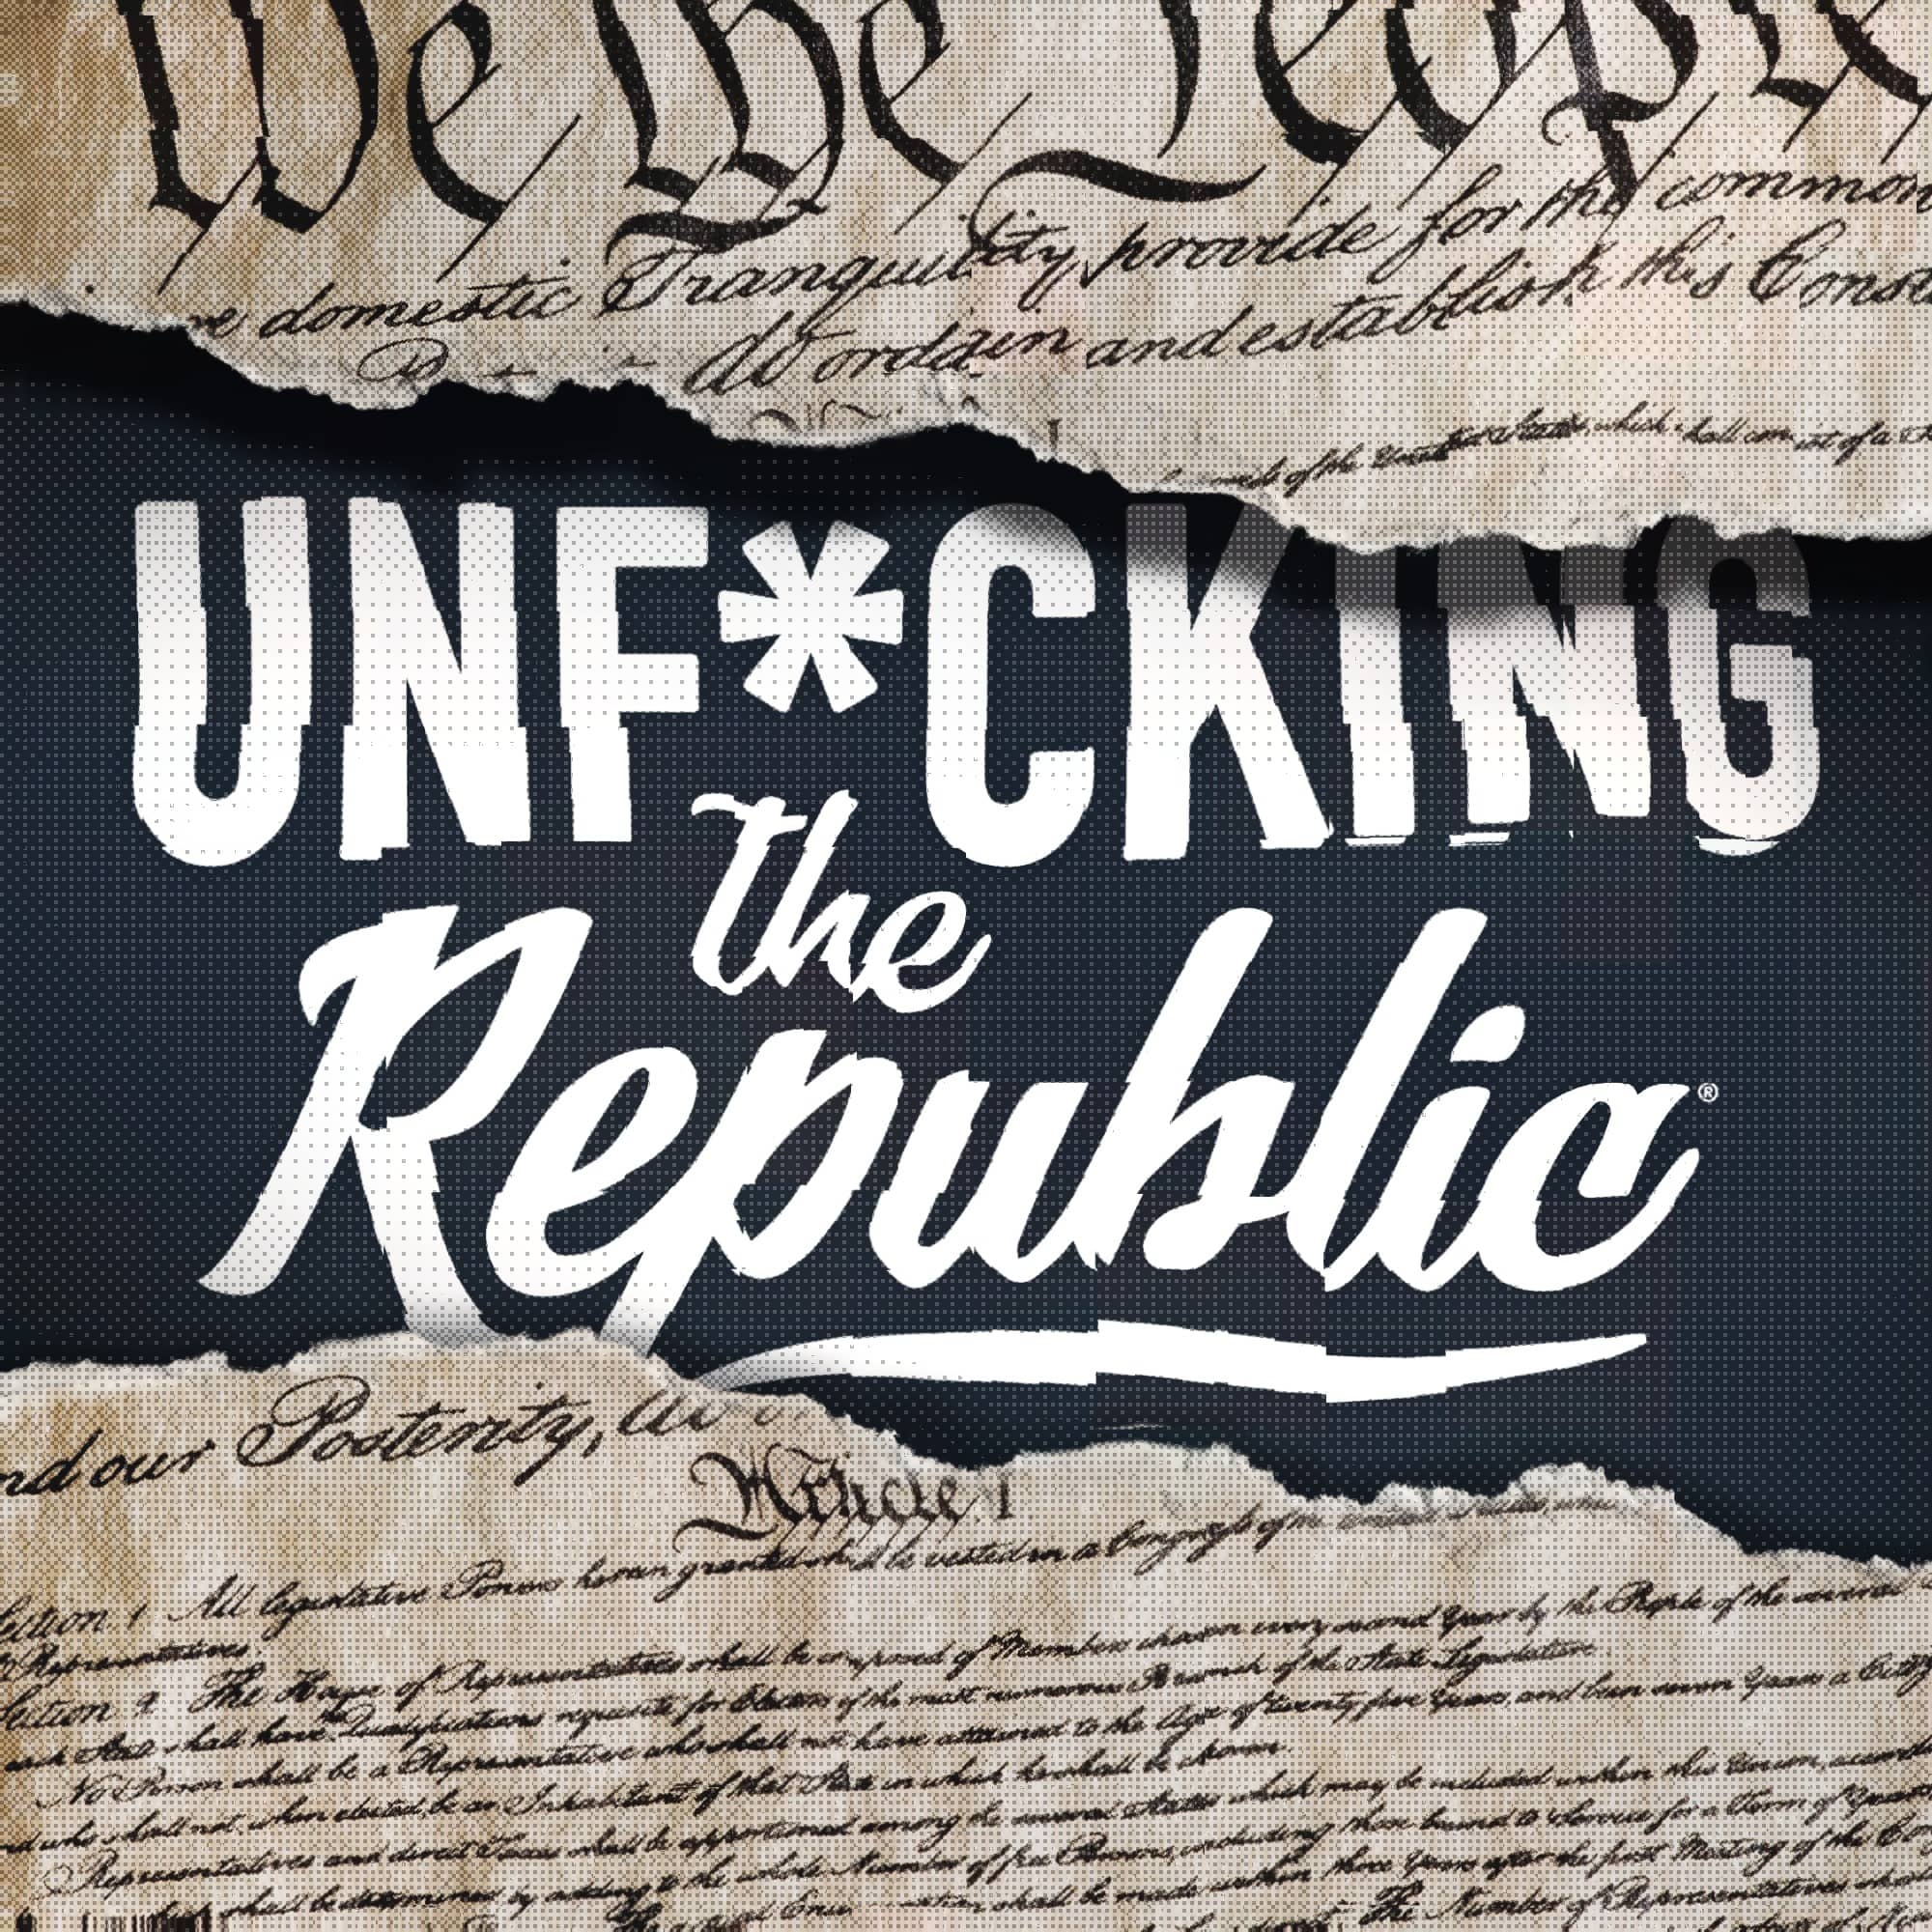 The US Constitution ripped in the middle revealing white text on a blue background that says, ‘Unf*cking the Republic.’ Letters have a glitchy effect on them.